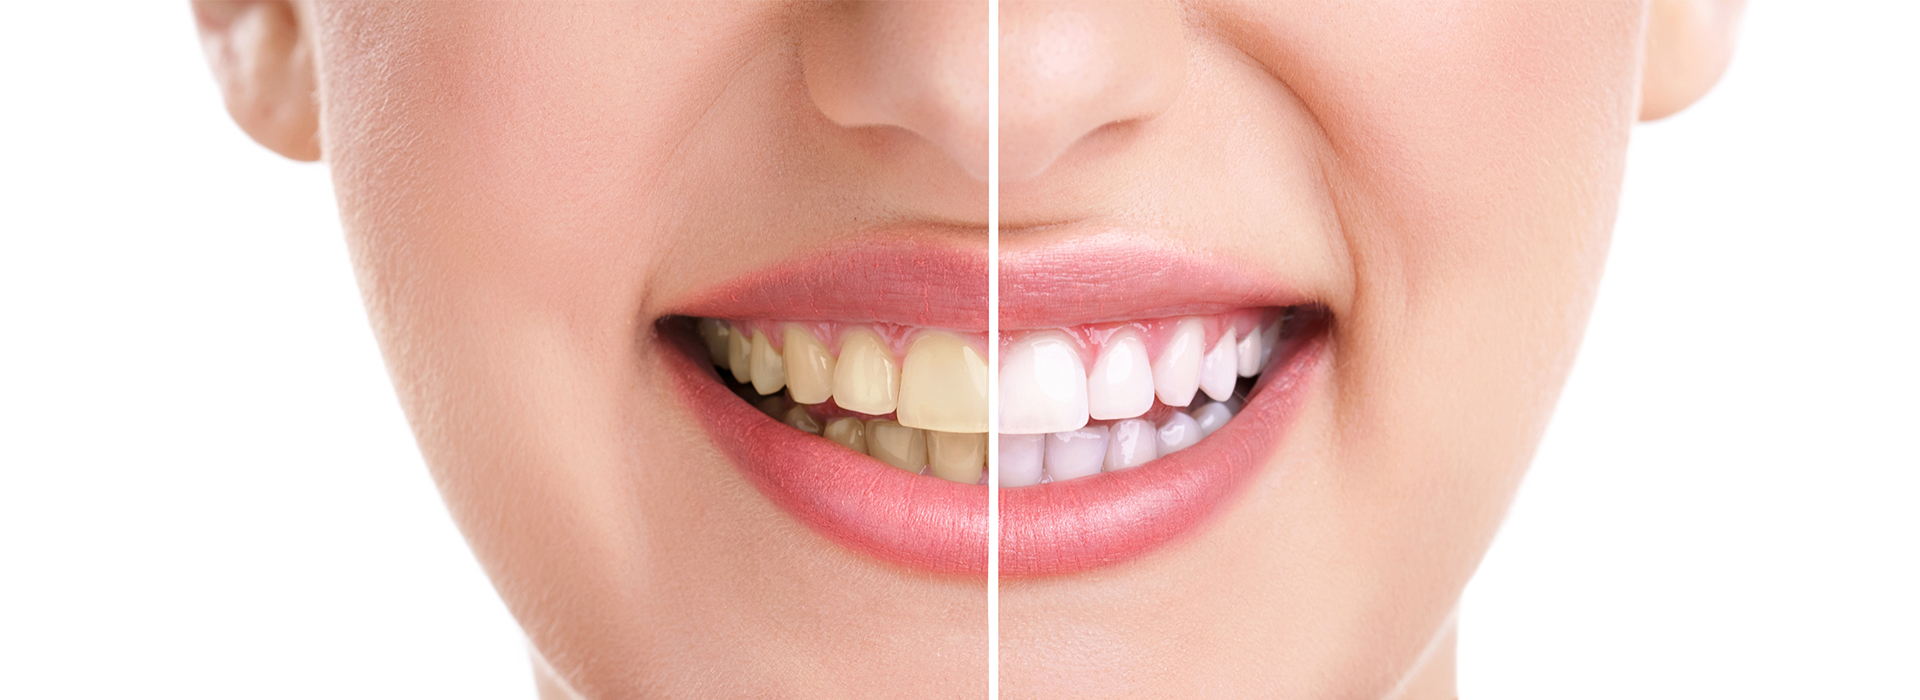 New Image Dentistry | Teeth Whitening, Intraoral Camera and Invisalign reg 